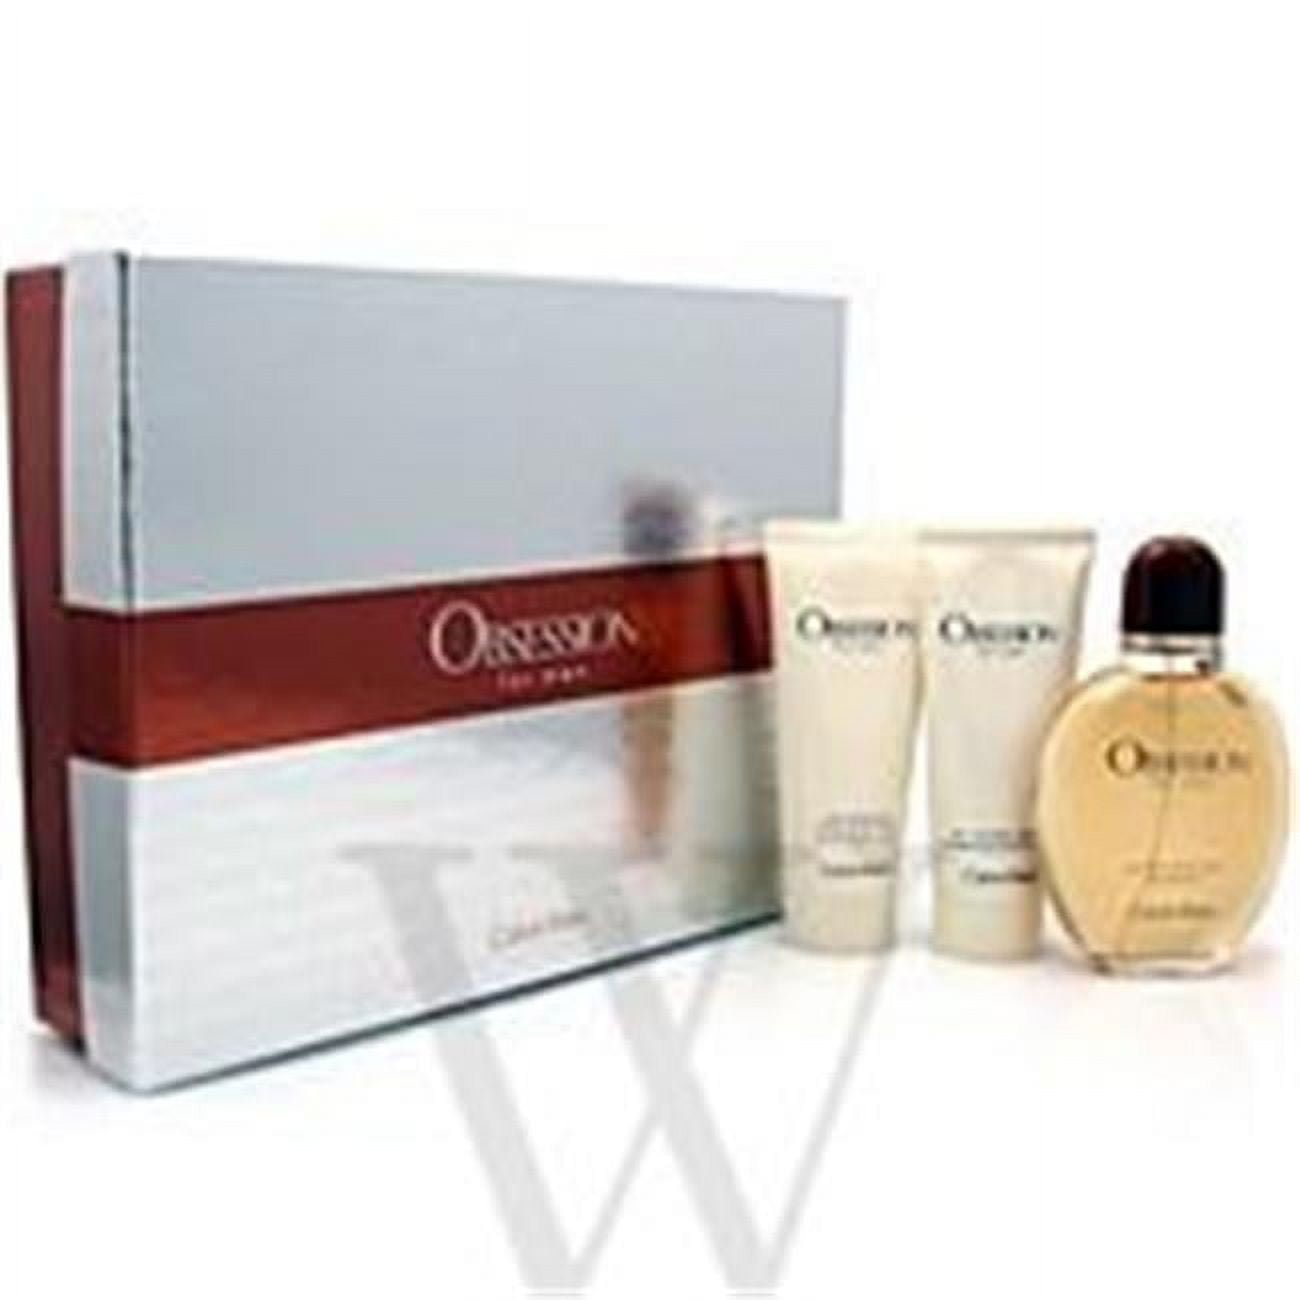 Calvin Klein Obsession Cologne Gift Set for Men, 4 Pieces 